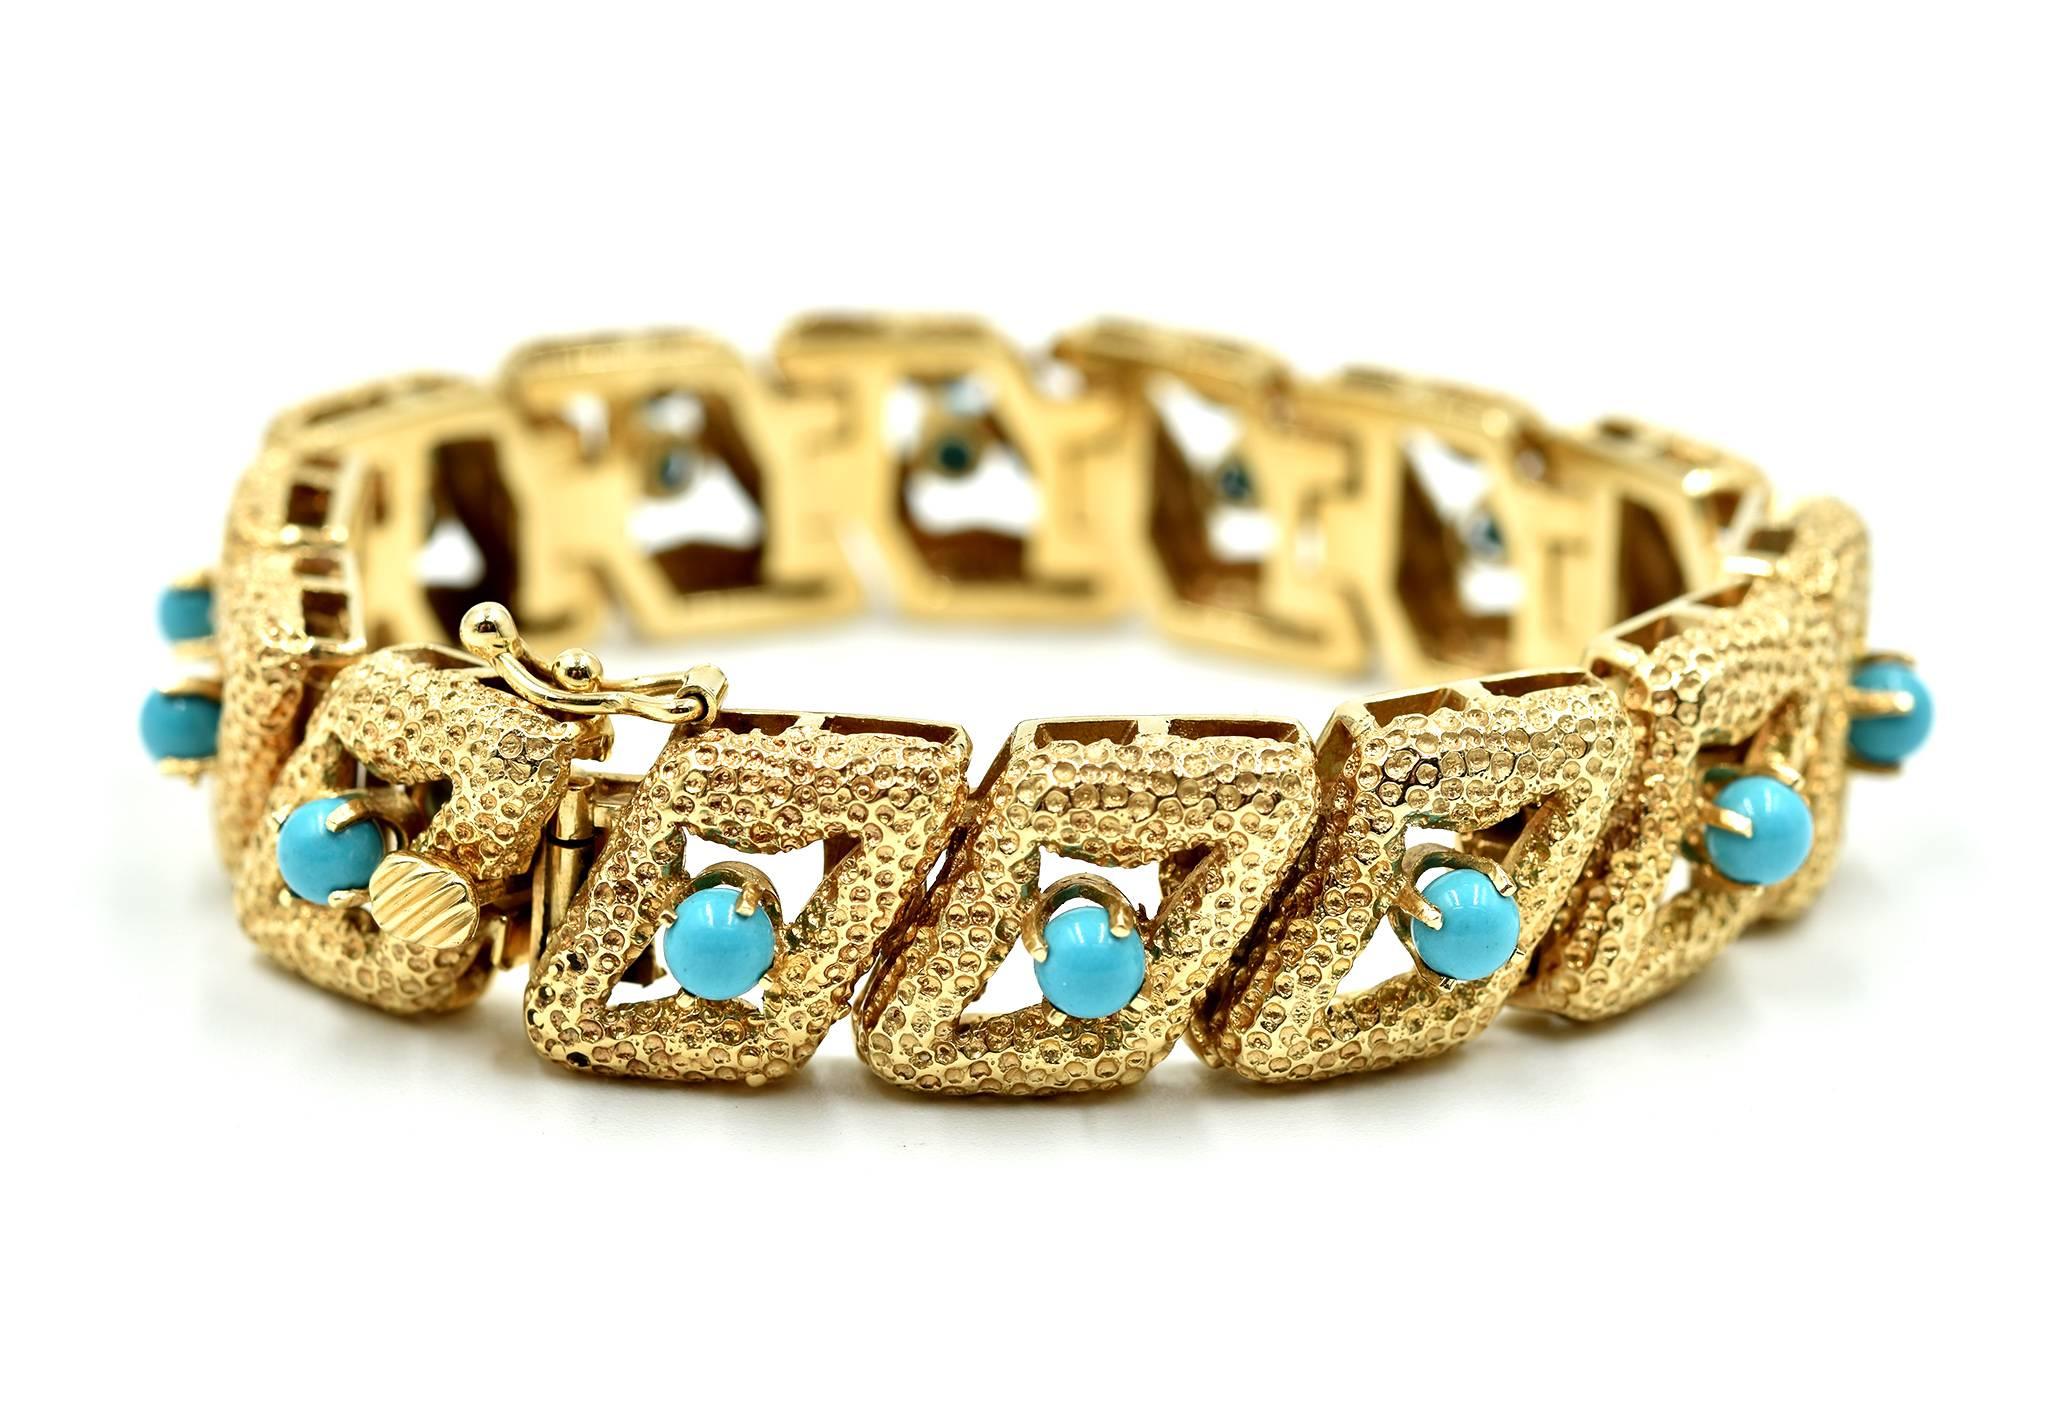 Designer: custom design
Material: 14k yellow gold
Turquoise: round balls of Persian blue turquoise
Dimensions: bracelet is 7 inches long and ½ inch wide
Weight: 48.42 grams
